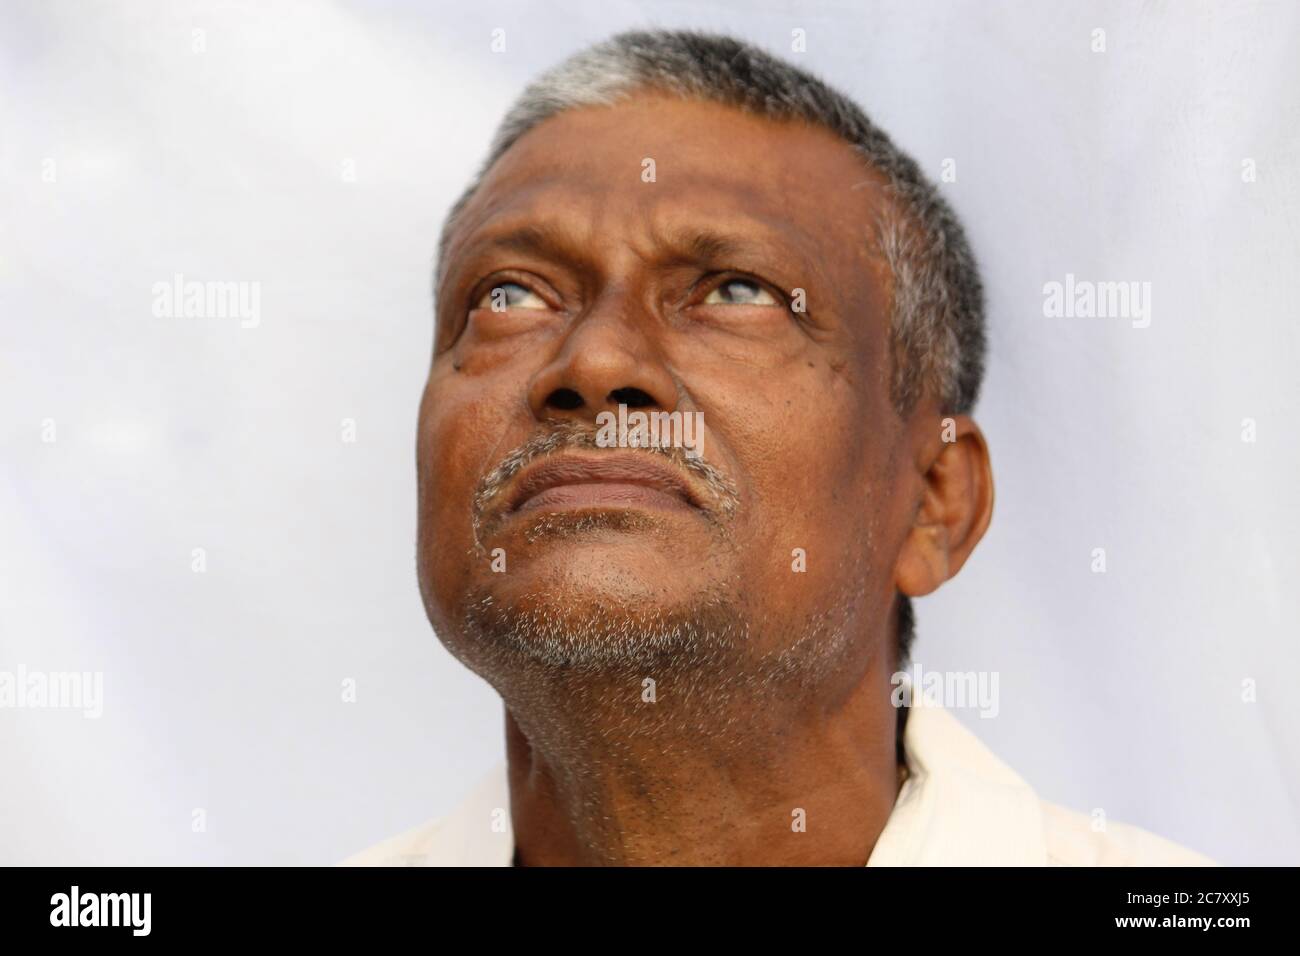 Closed mouth and beard of a senior Indian man looking up, white background. Old Indian man with black and white hair. Stock Photo